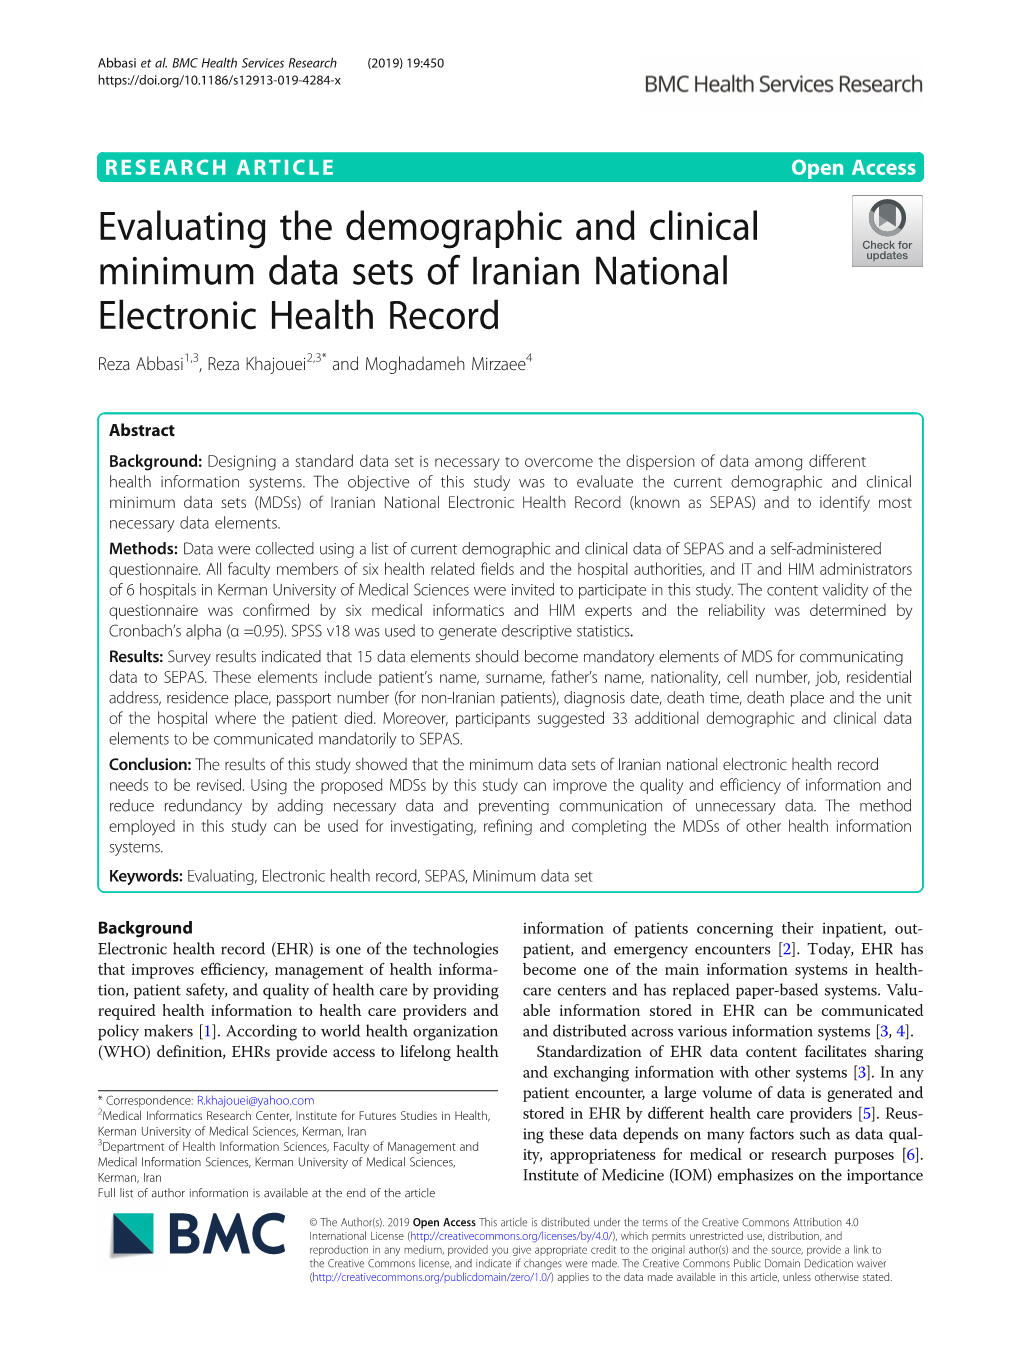 Evaluating the Demographic and Clinical Minimum Data Sets of Iranian National Electronic Health Record Reza Abbasi1,3, Reza Khajouei2,3* and Moghadameh Mirzaee4